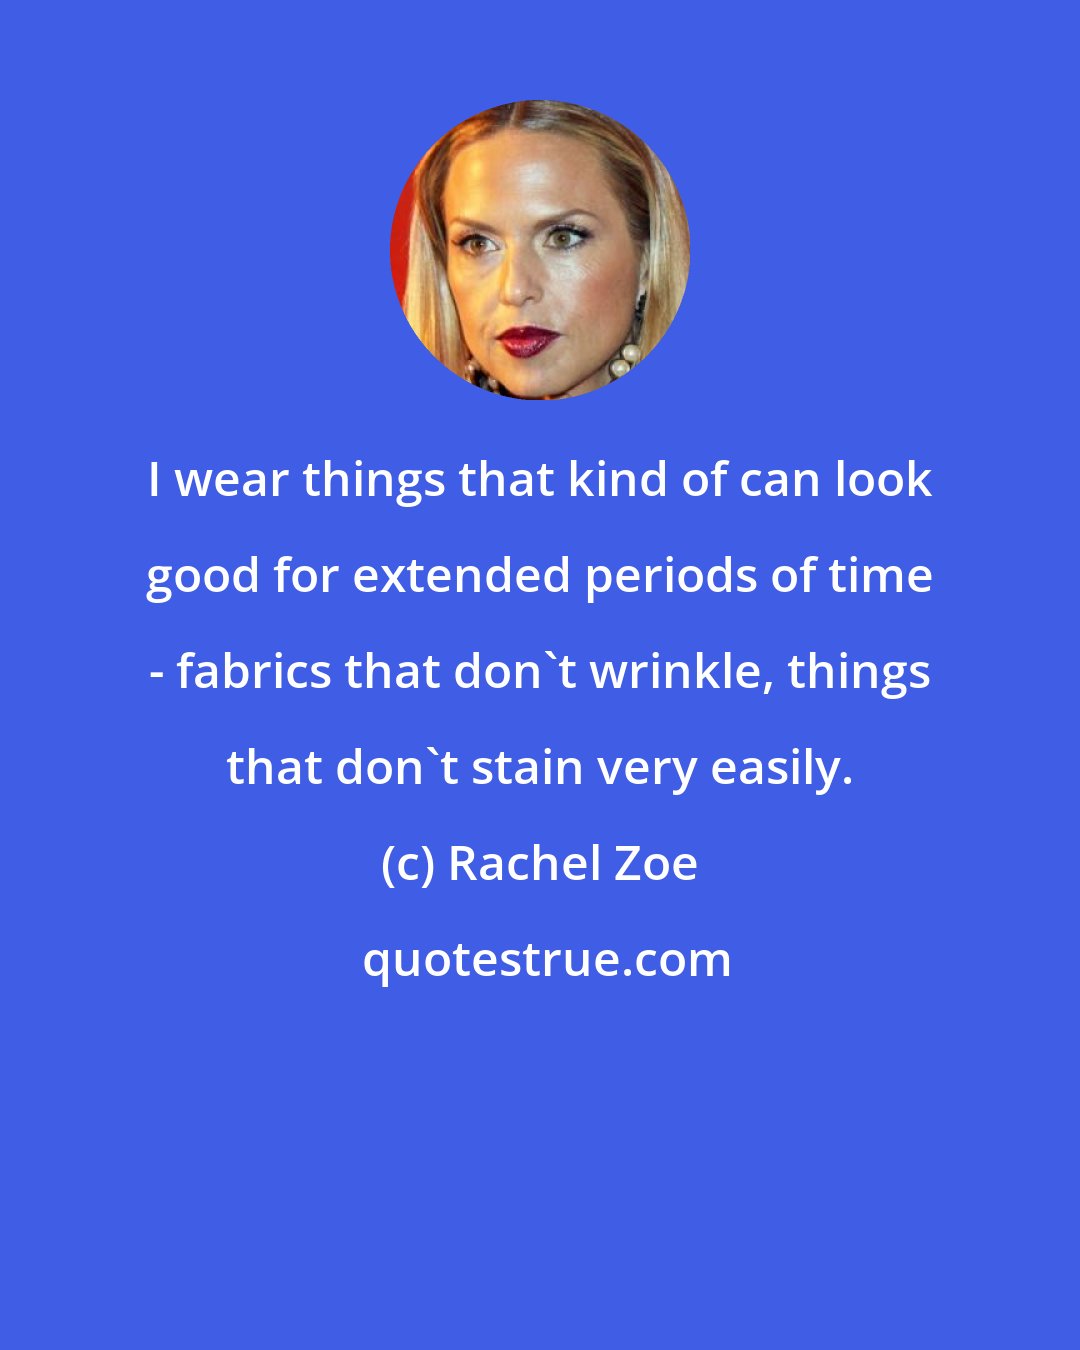 Rachel Zoe: I wear things that kind of can look good for extended periods of time - fabrics that don't wrinkle, things that don't stain very easily.